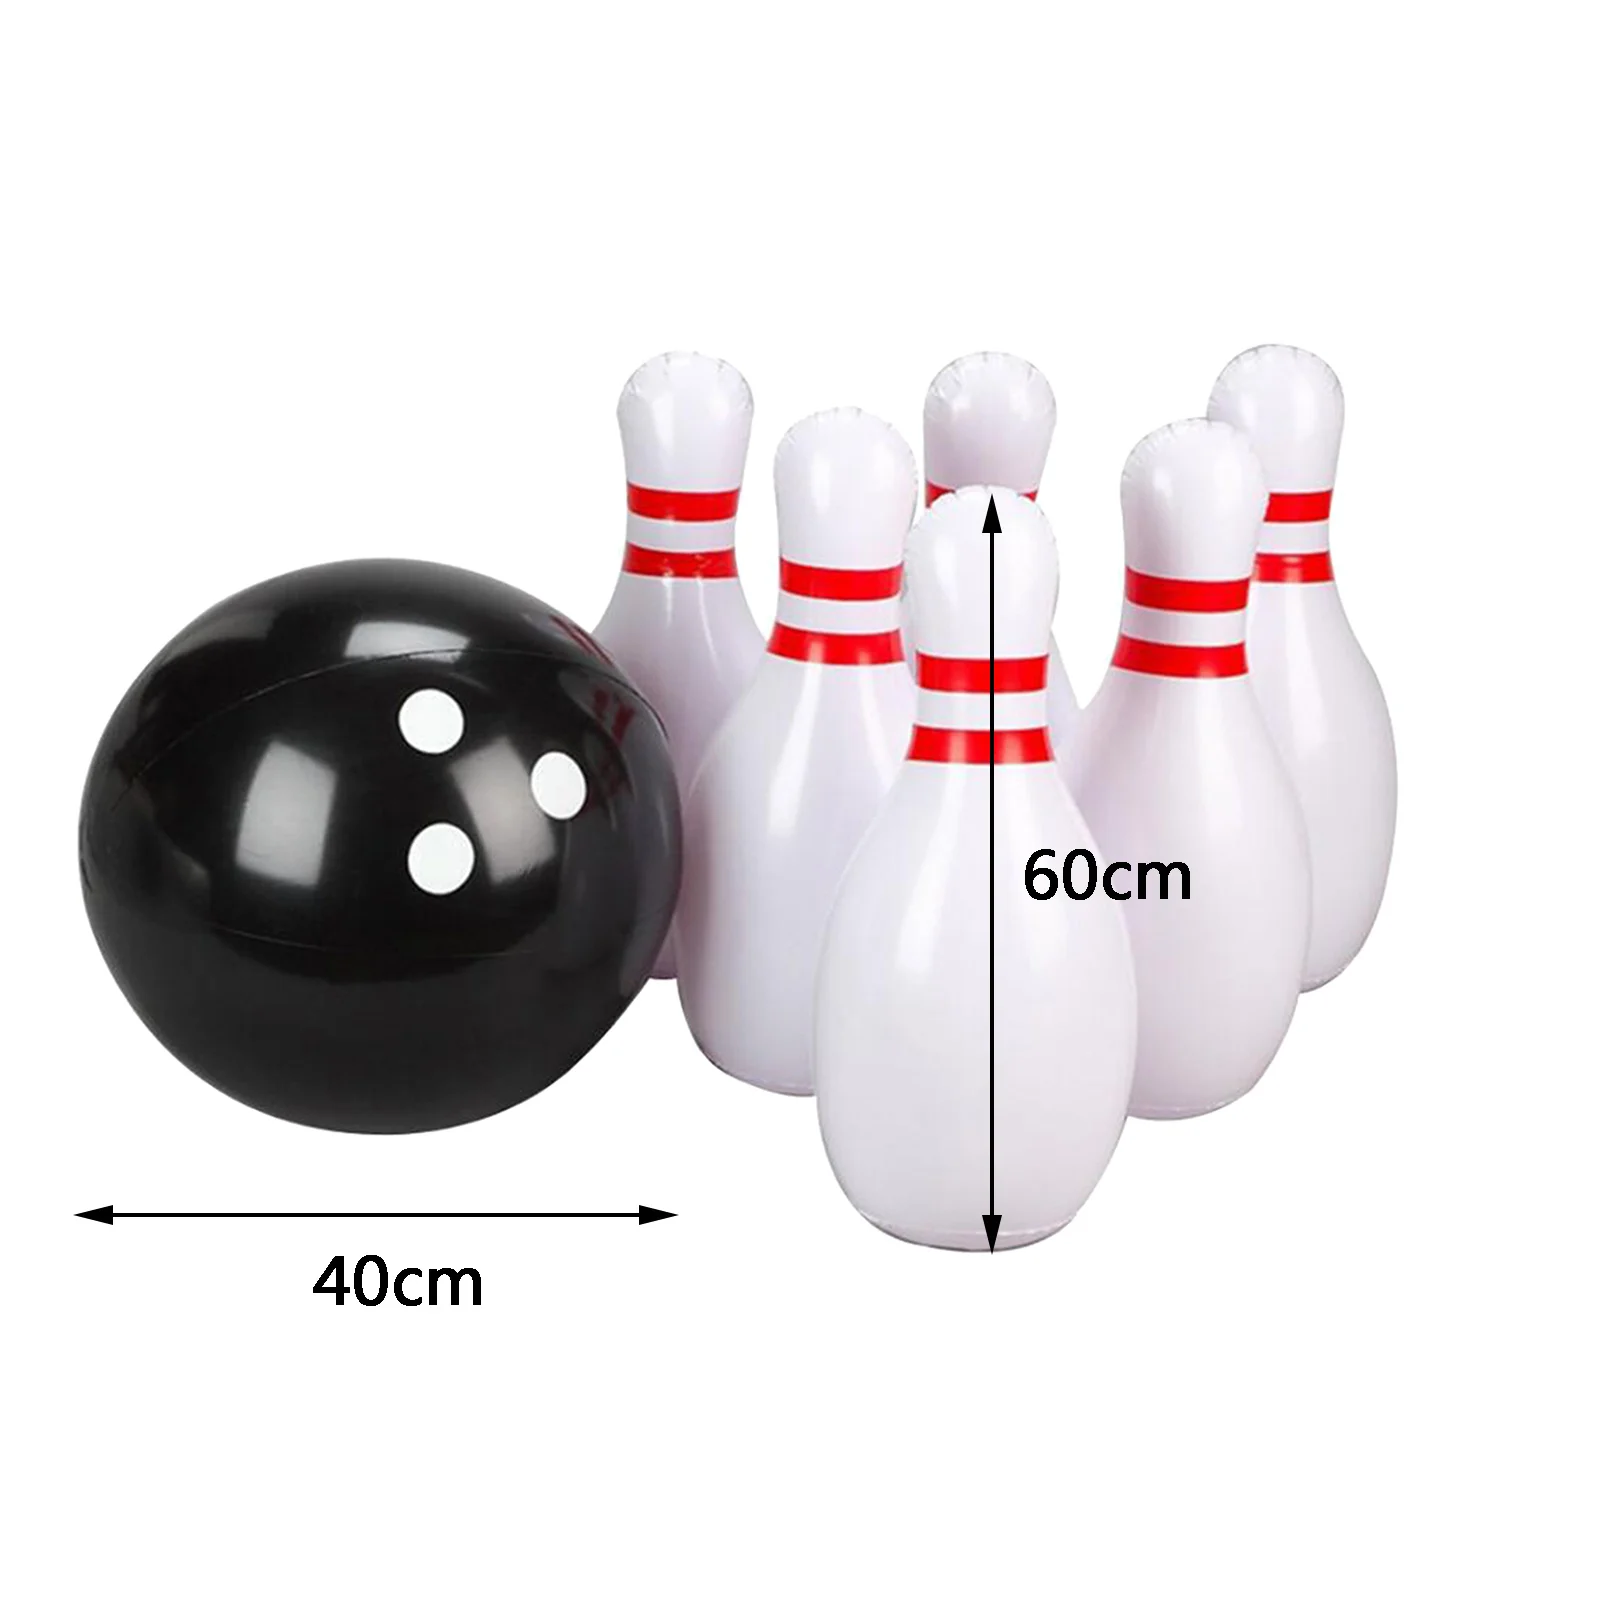 Giant Inflatable Bowling Set for Kids Outdoor Lawn Yard Games for Family Together Jumbo 24